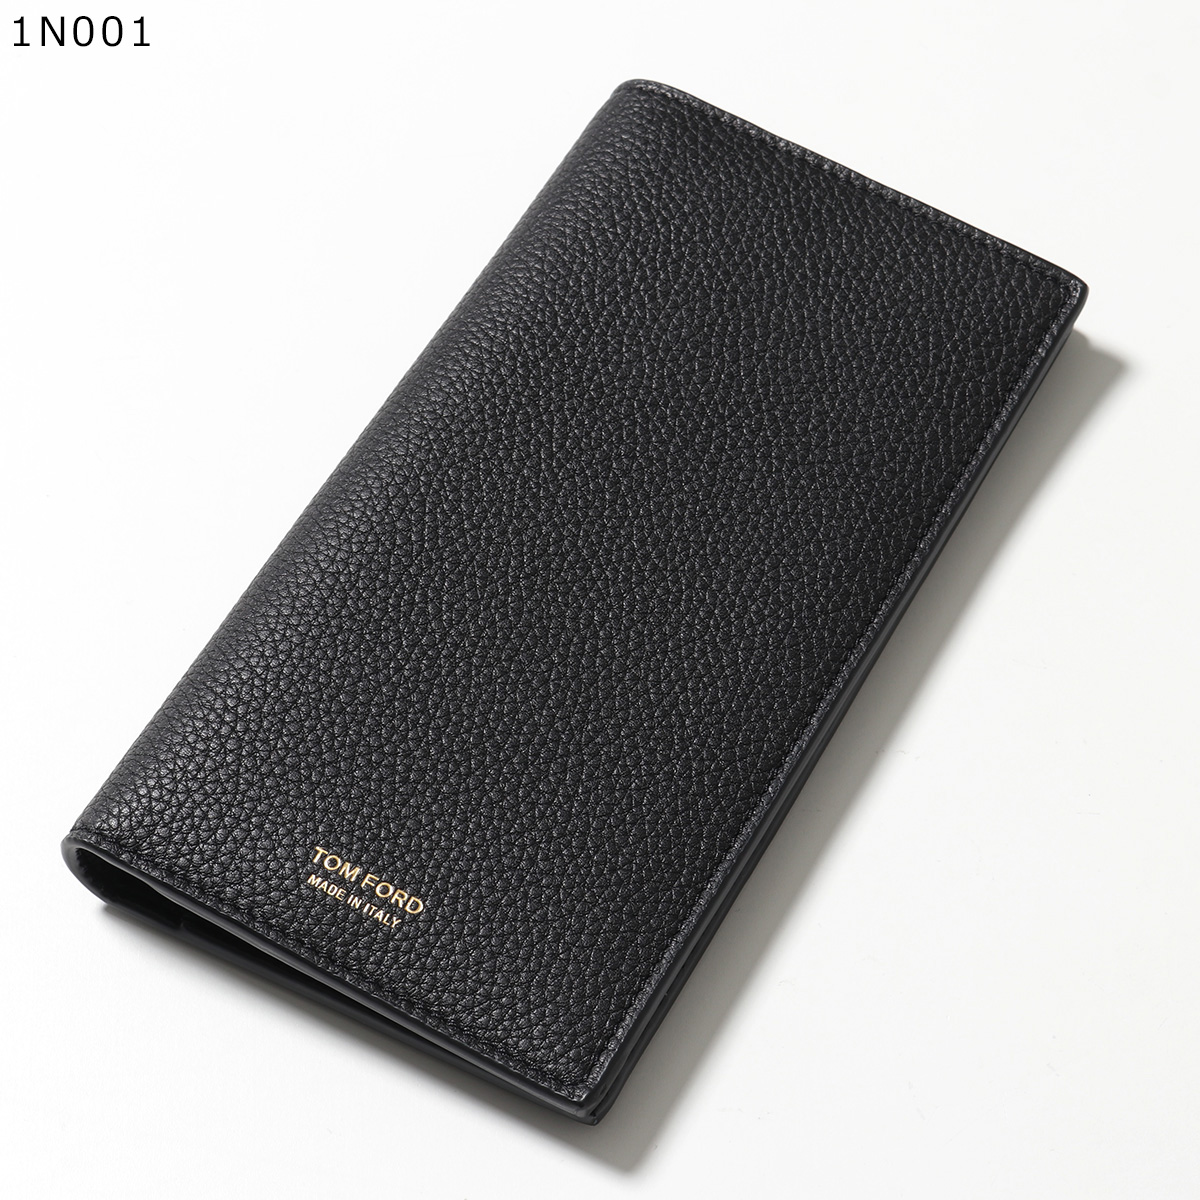 TOM FORD トムフォード 二つ折り長財布 Y0251T LCL158 Y0251 LCL158S メンズ レザー ロゴ 小銭入れあり カラー2色｜s-musee｜02